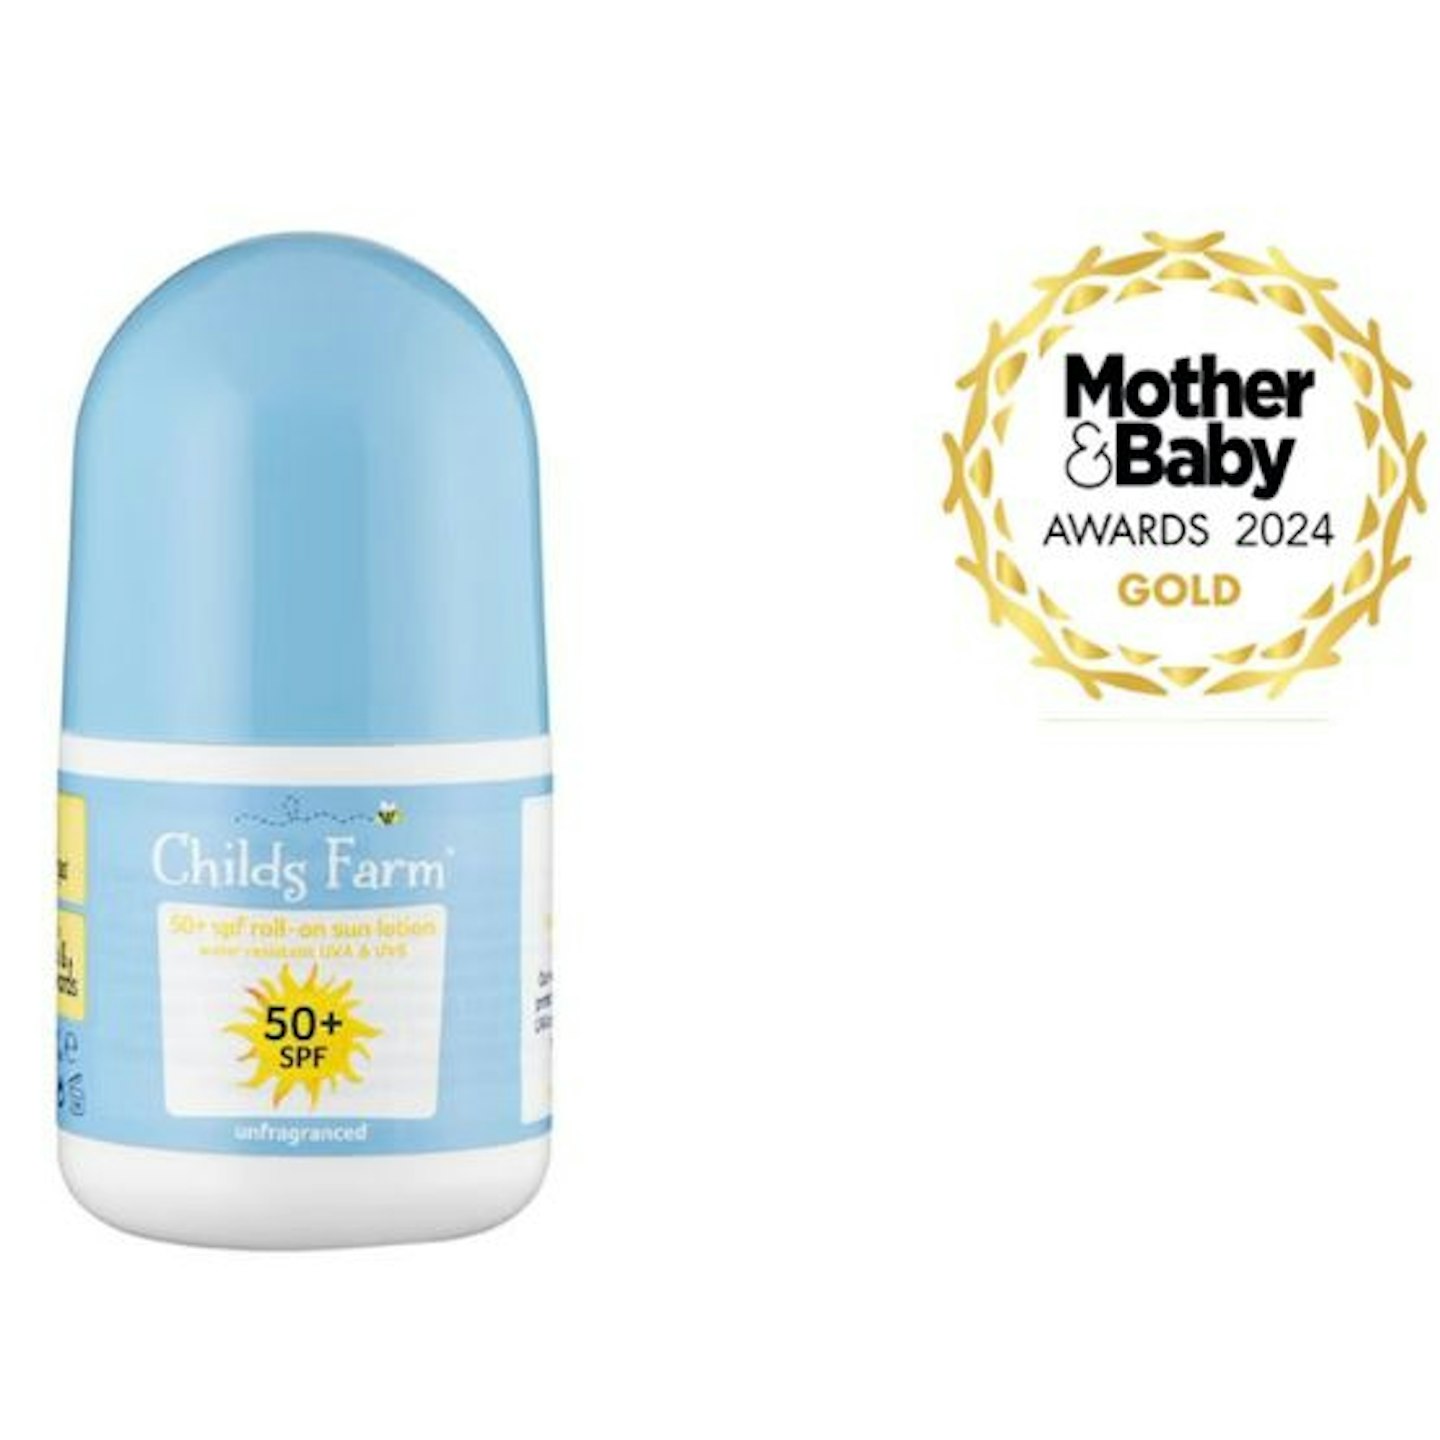 Childs Farm Kids and Baby Sun Cream Roll-On SPF 50+